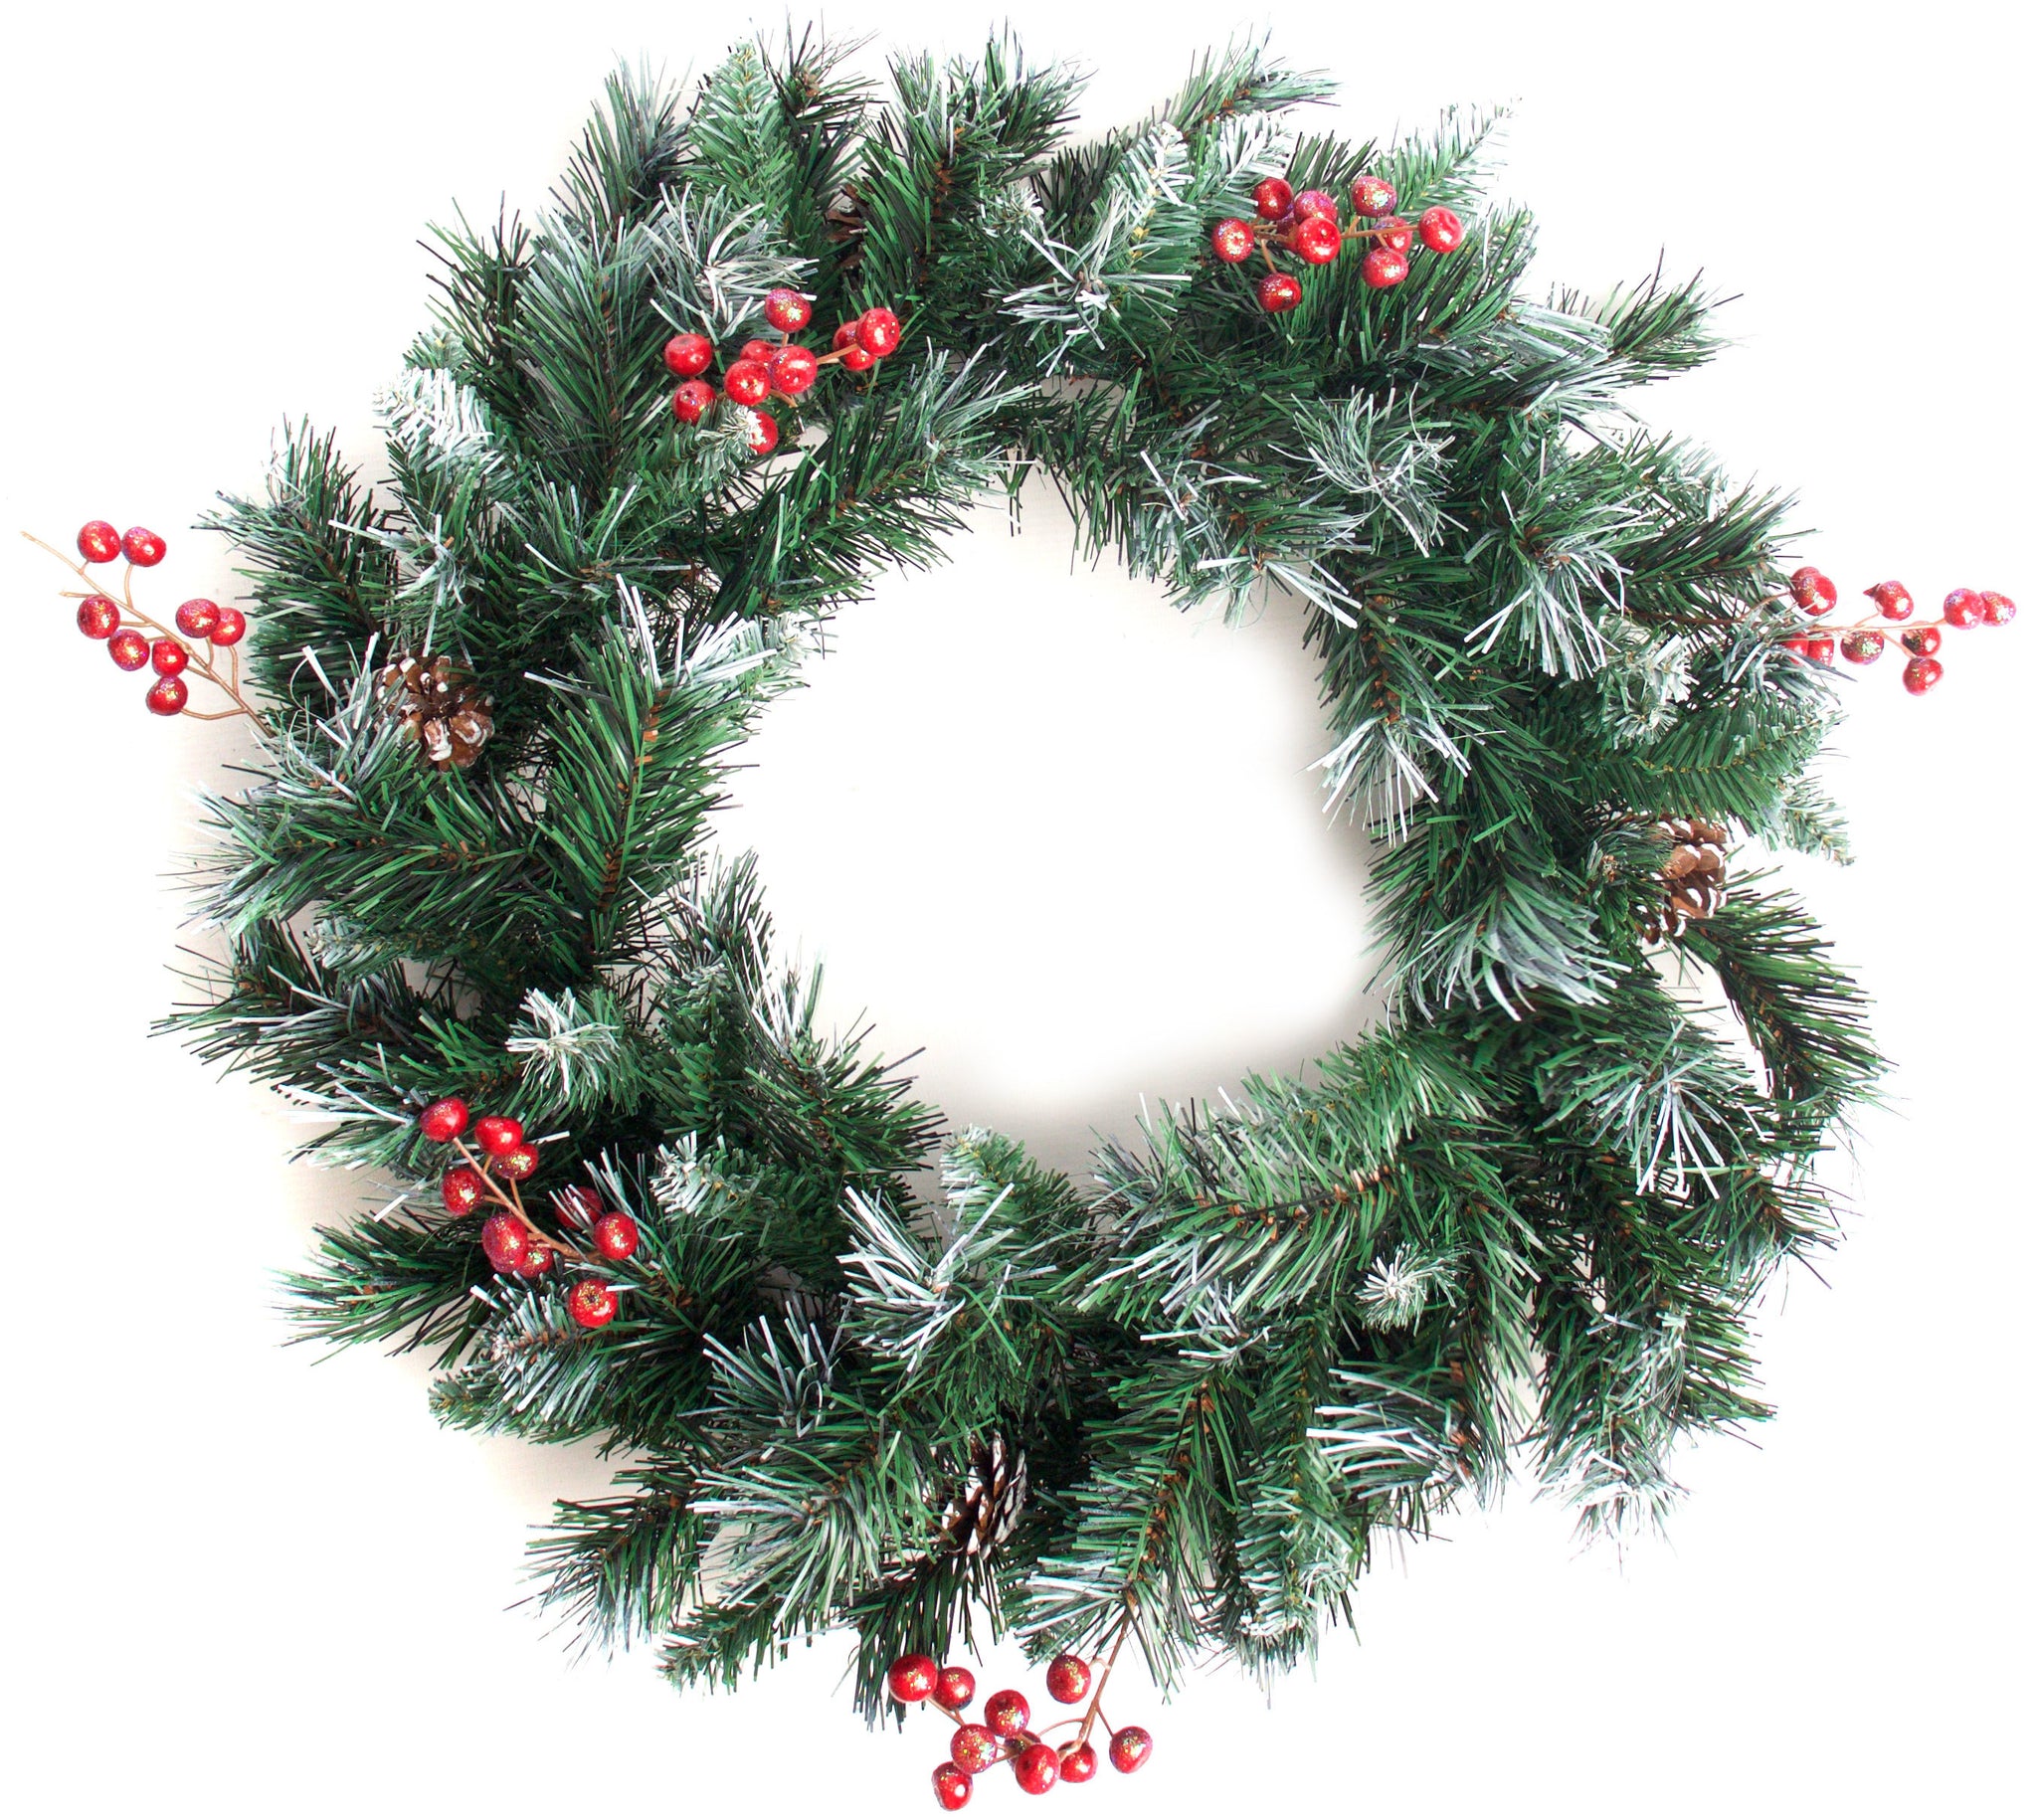 Best Artificial Deluxe Frosted Christmas Wreath with Pine Cones & Winter Red Berries